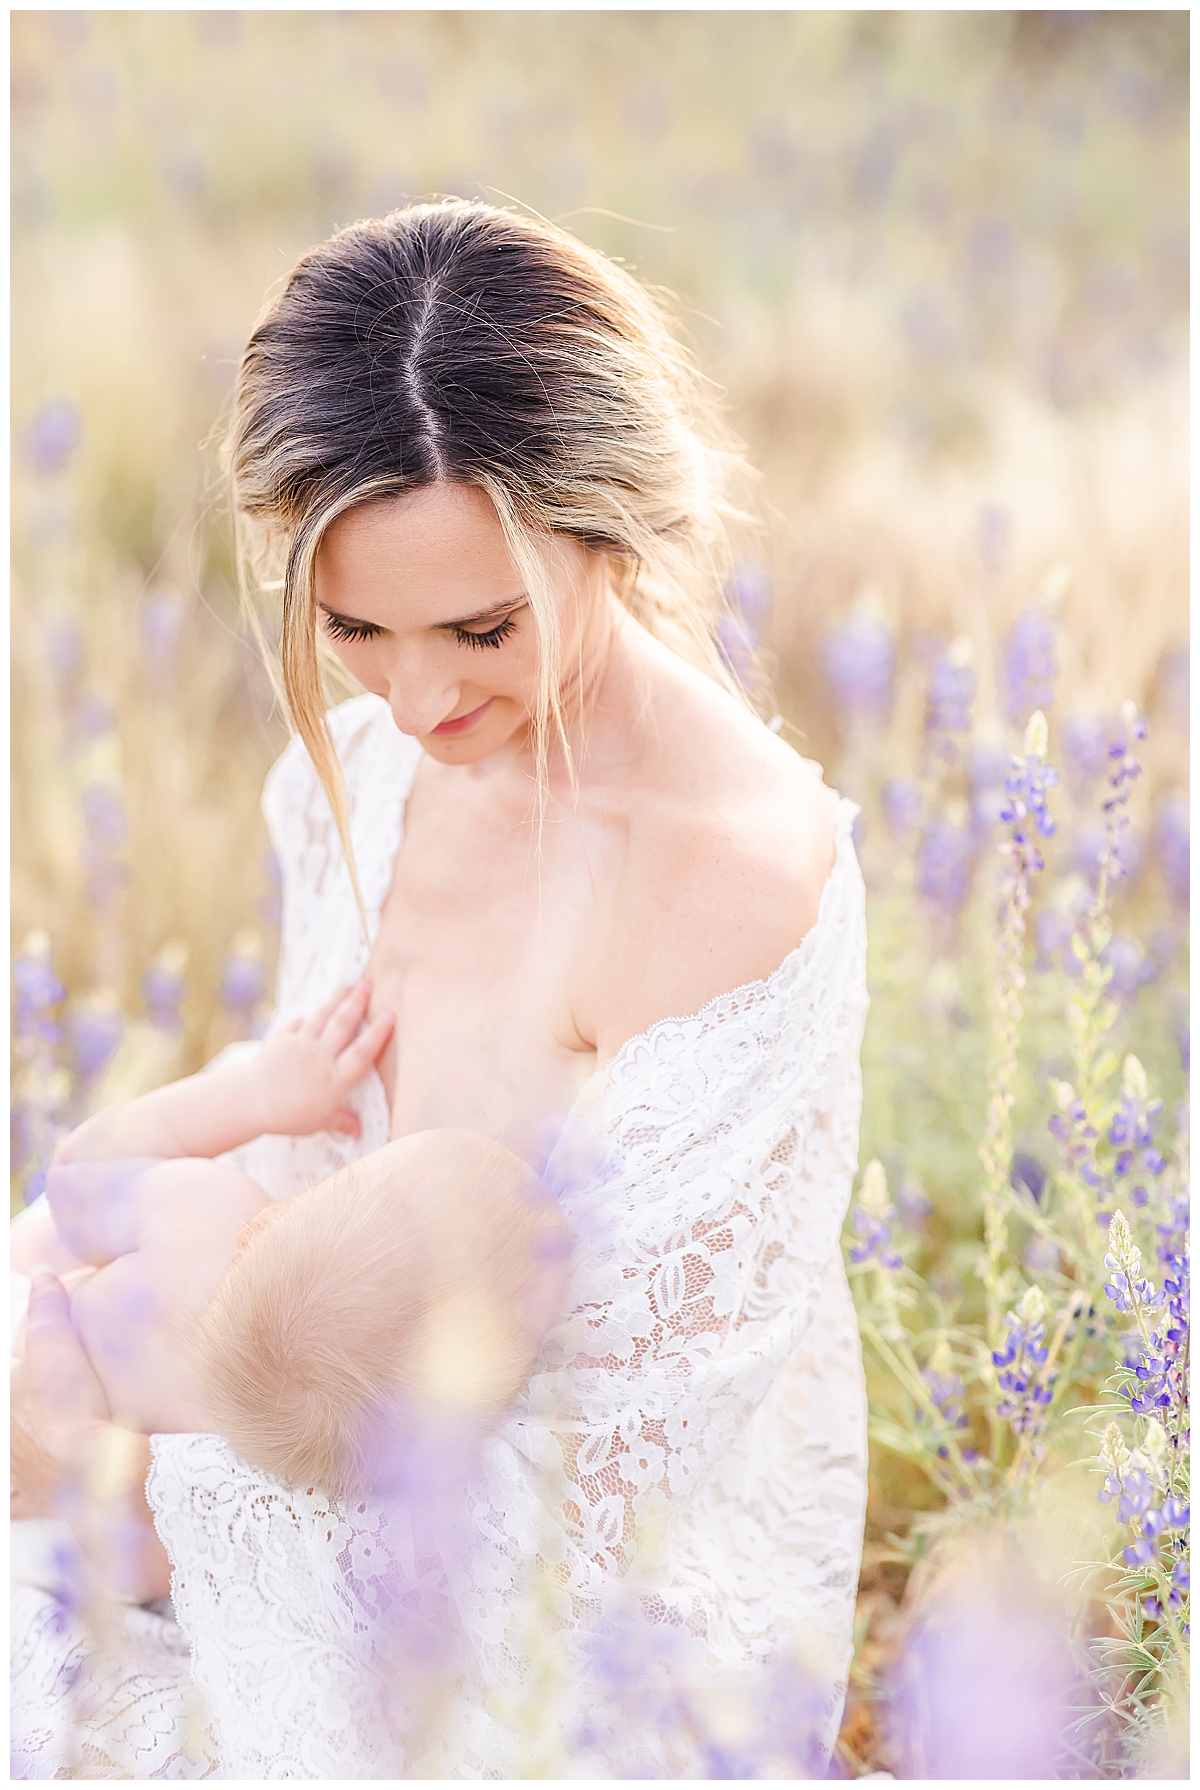 Christine Deaton Creative | Scottsdale Phoenix Arizona | Desert Photos | Newborn Pictures | What to Wear | Newborn Nursing | Newborn Photos | Nursing Photos | Newborn Photoshoot Outfit Inspiration | How to Dress | Color Scheme | Neutral Colors | White Cream Beige | Newborn Photography | Nursing Photography | Newborn Portraits | Motherhood Photography | Lifestyle Posing | Motherhood Portraits | Nursing Mother | Postpartum Dress | Postpartum What to Wear | Lace Dress | Widlfowers | Desert Wildflowers | Wildflower Photography 